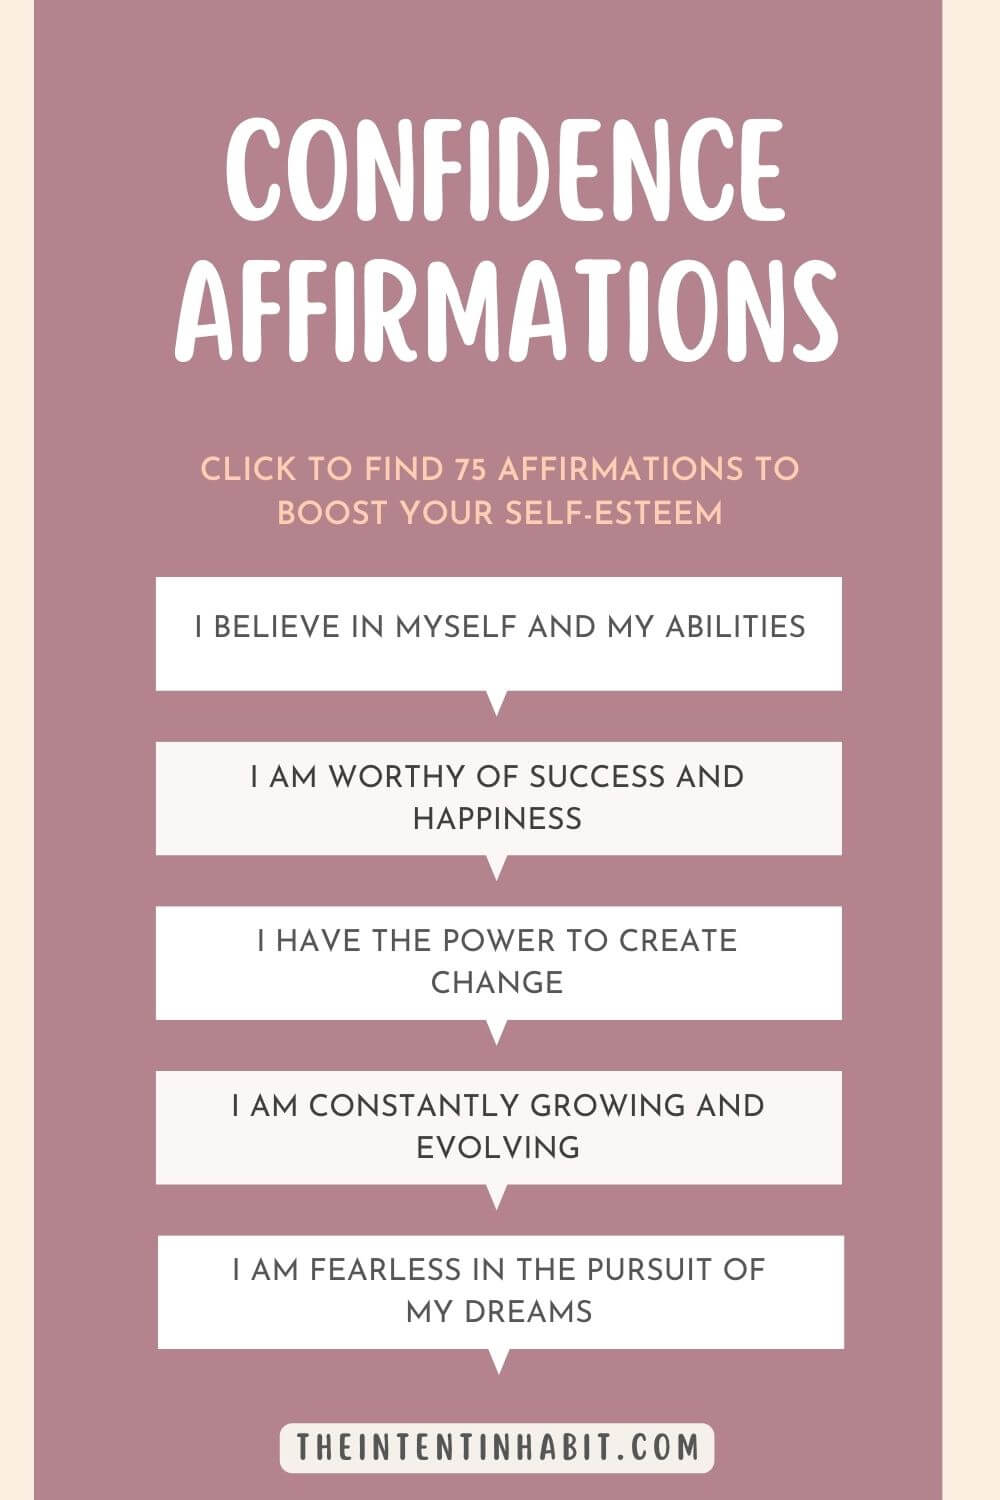 self-confidence affirmations infographic.